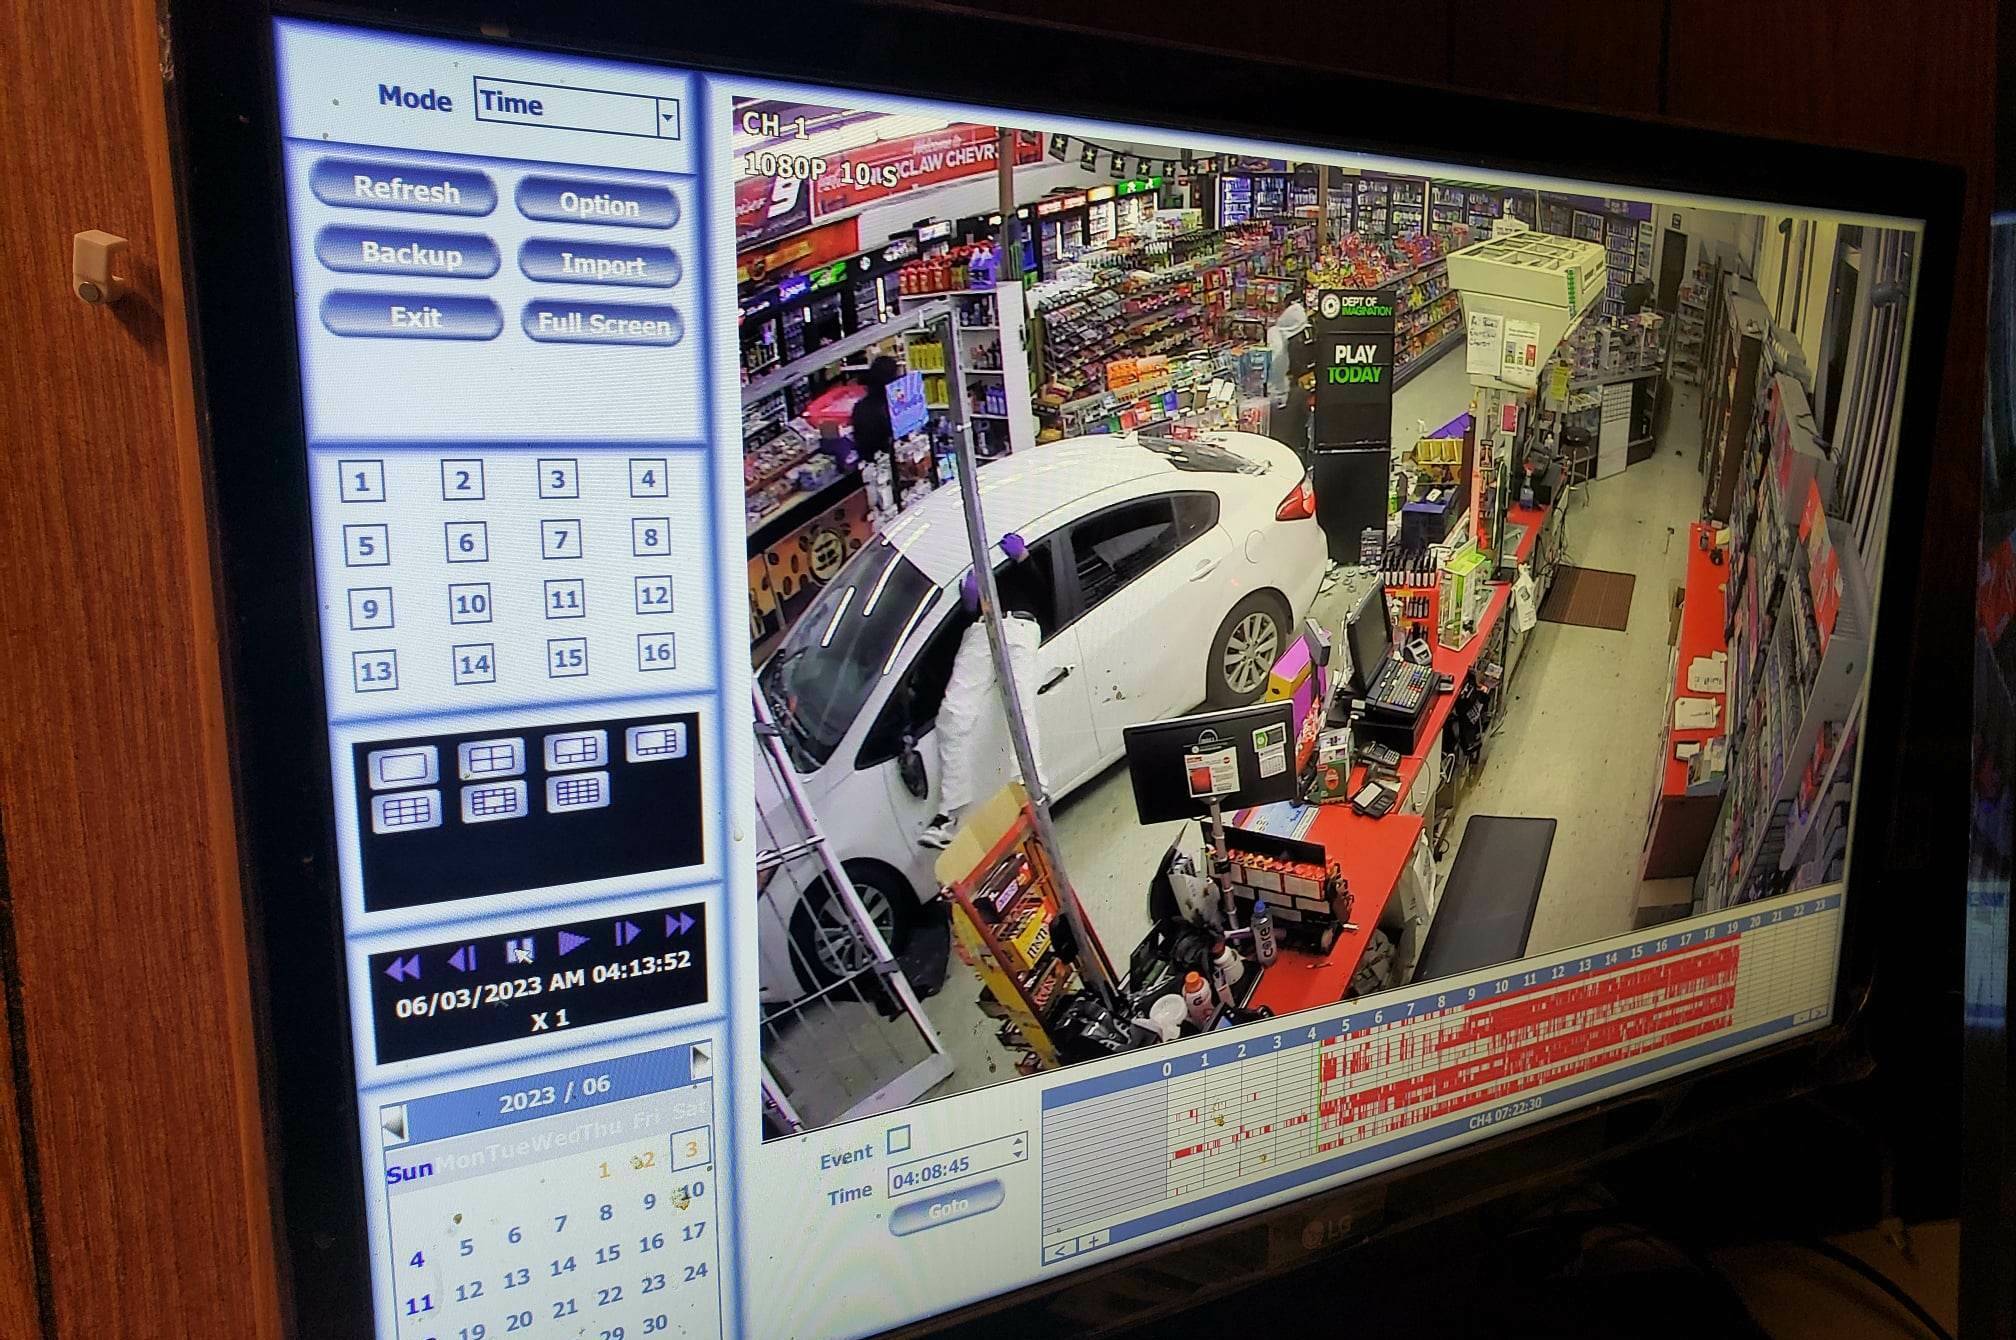 Unknown persons used a car to back into the Enumclaw Chevron station off SR 169 in the early hours of June 3. In this security footage, you can see the driver exiting the car via the window.